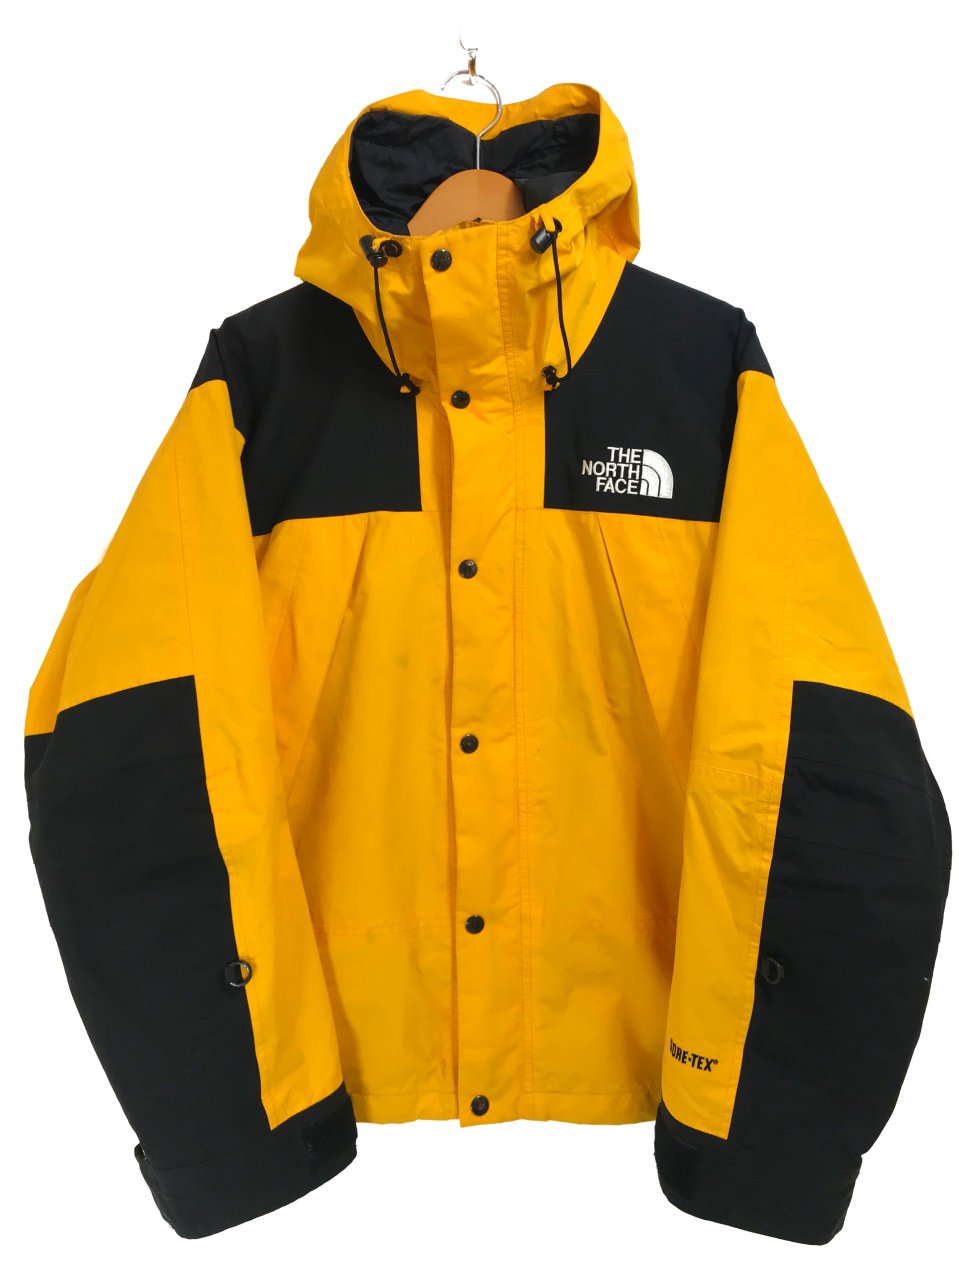 THE NORTH FACE Mountain Jacket 黄黒 M ノースフェイス マウンテン ...